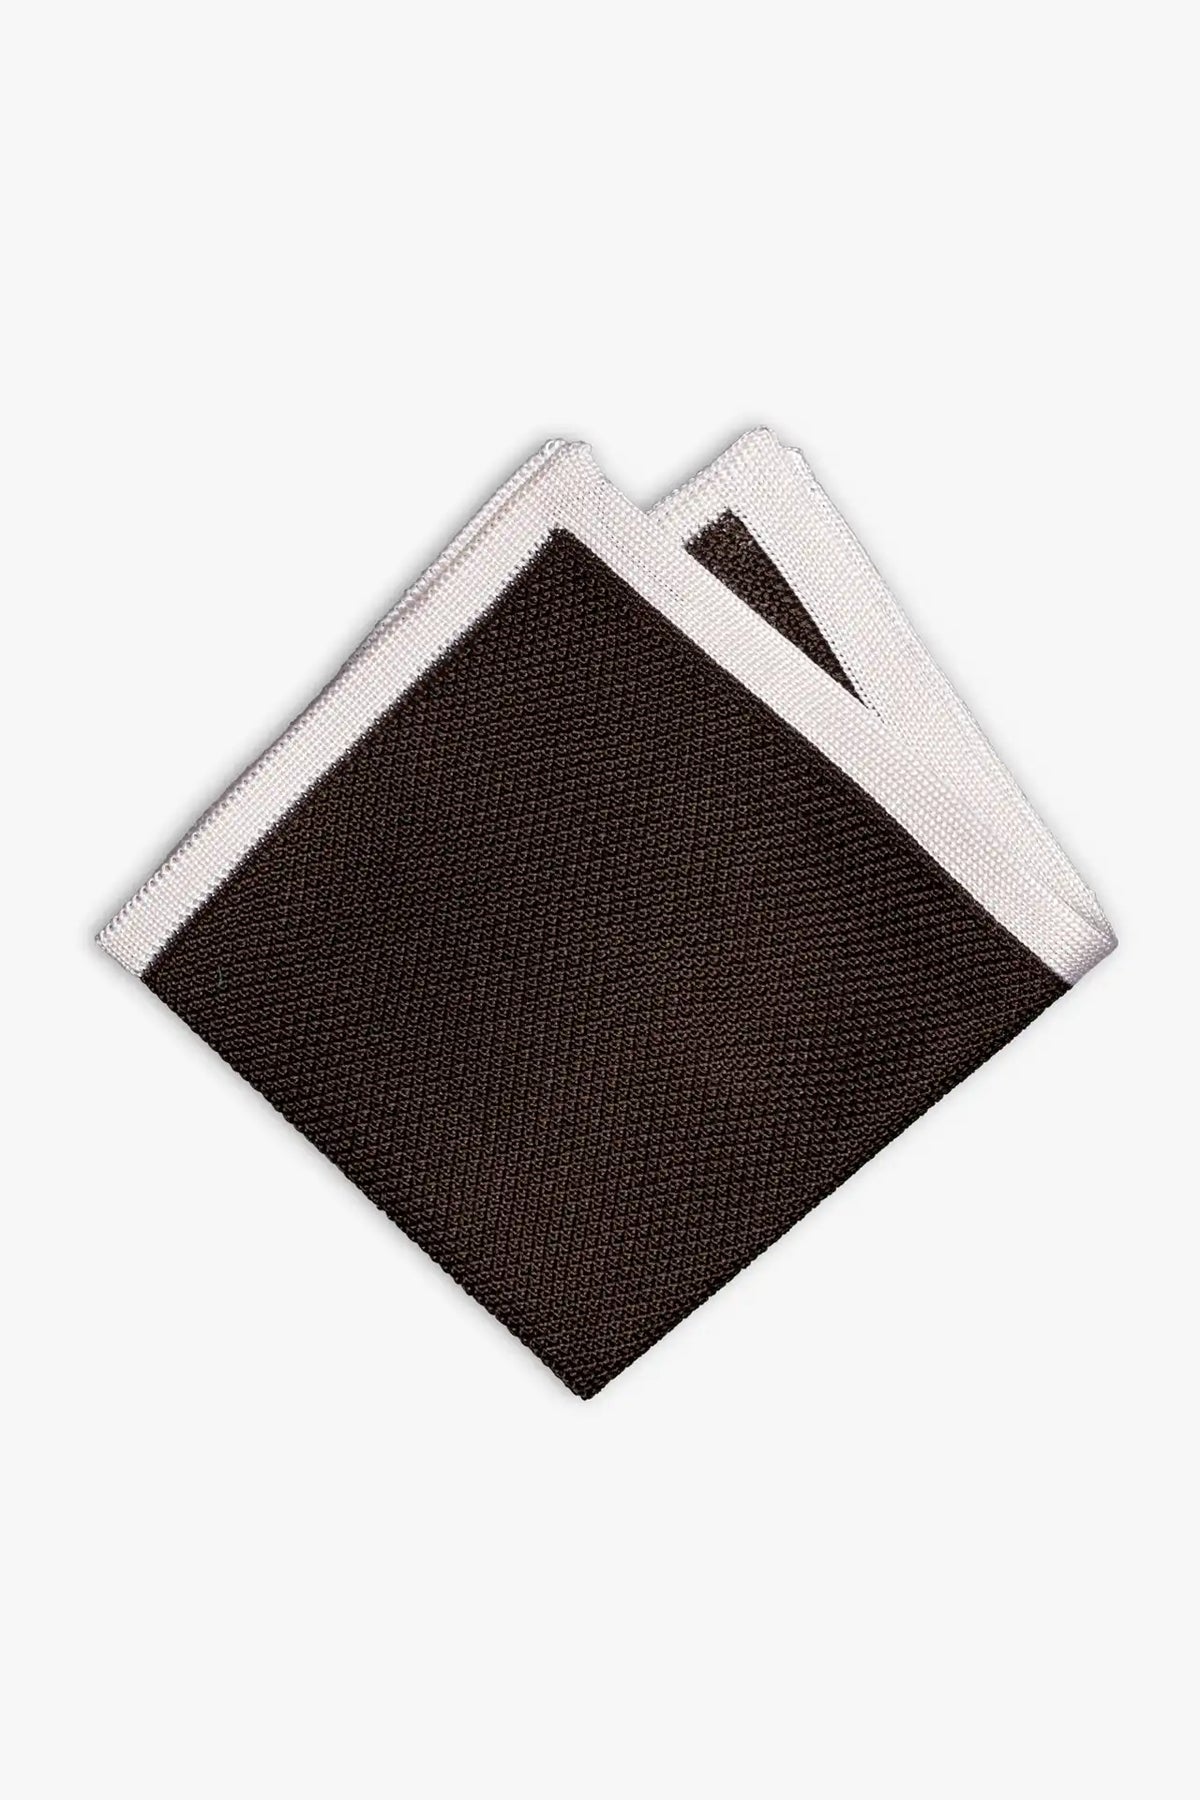 Brown knitted pocket square with white boarder. Made of silk in Italy.